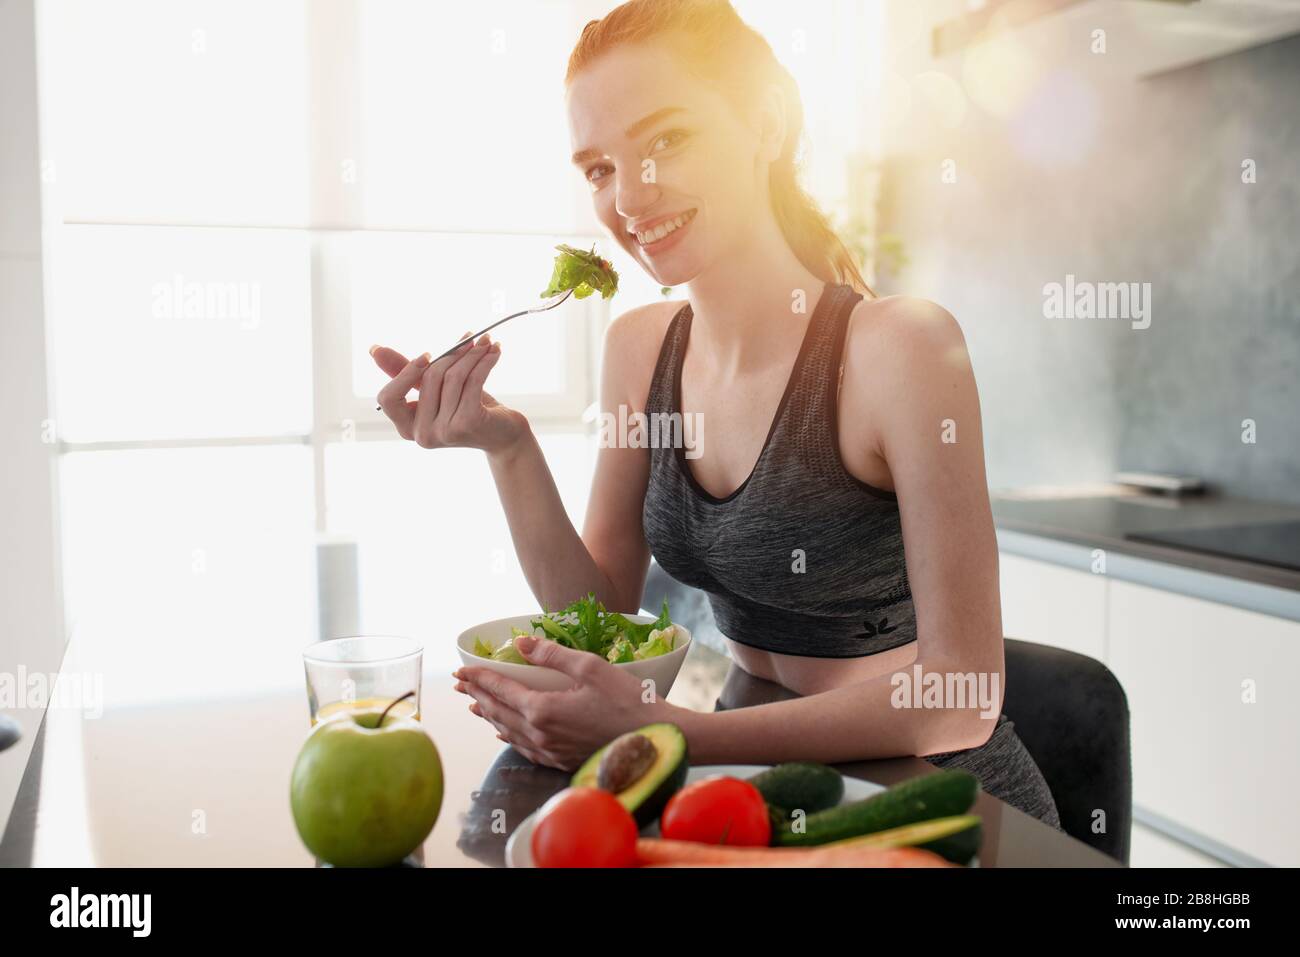 Athletic girl with gym clothes eats salad in the kitchen Stock Photo